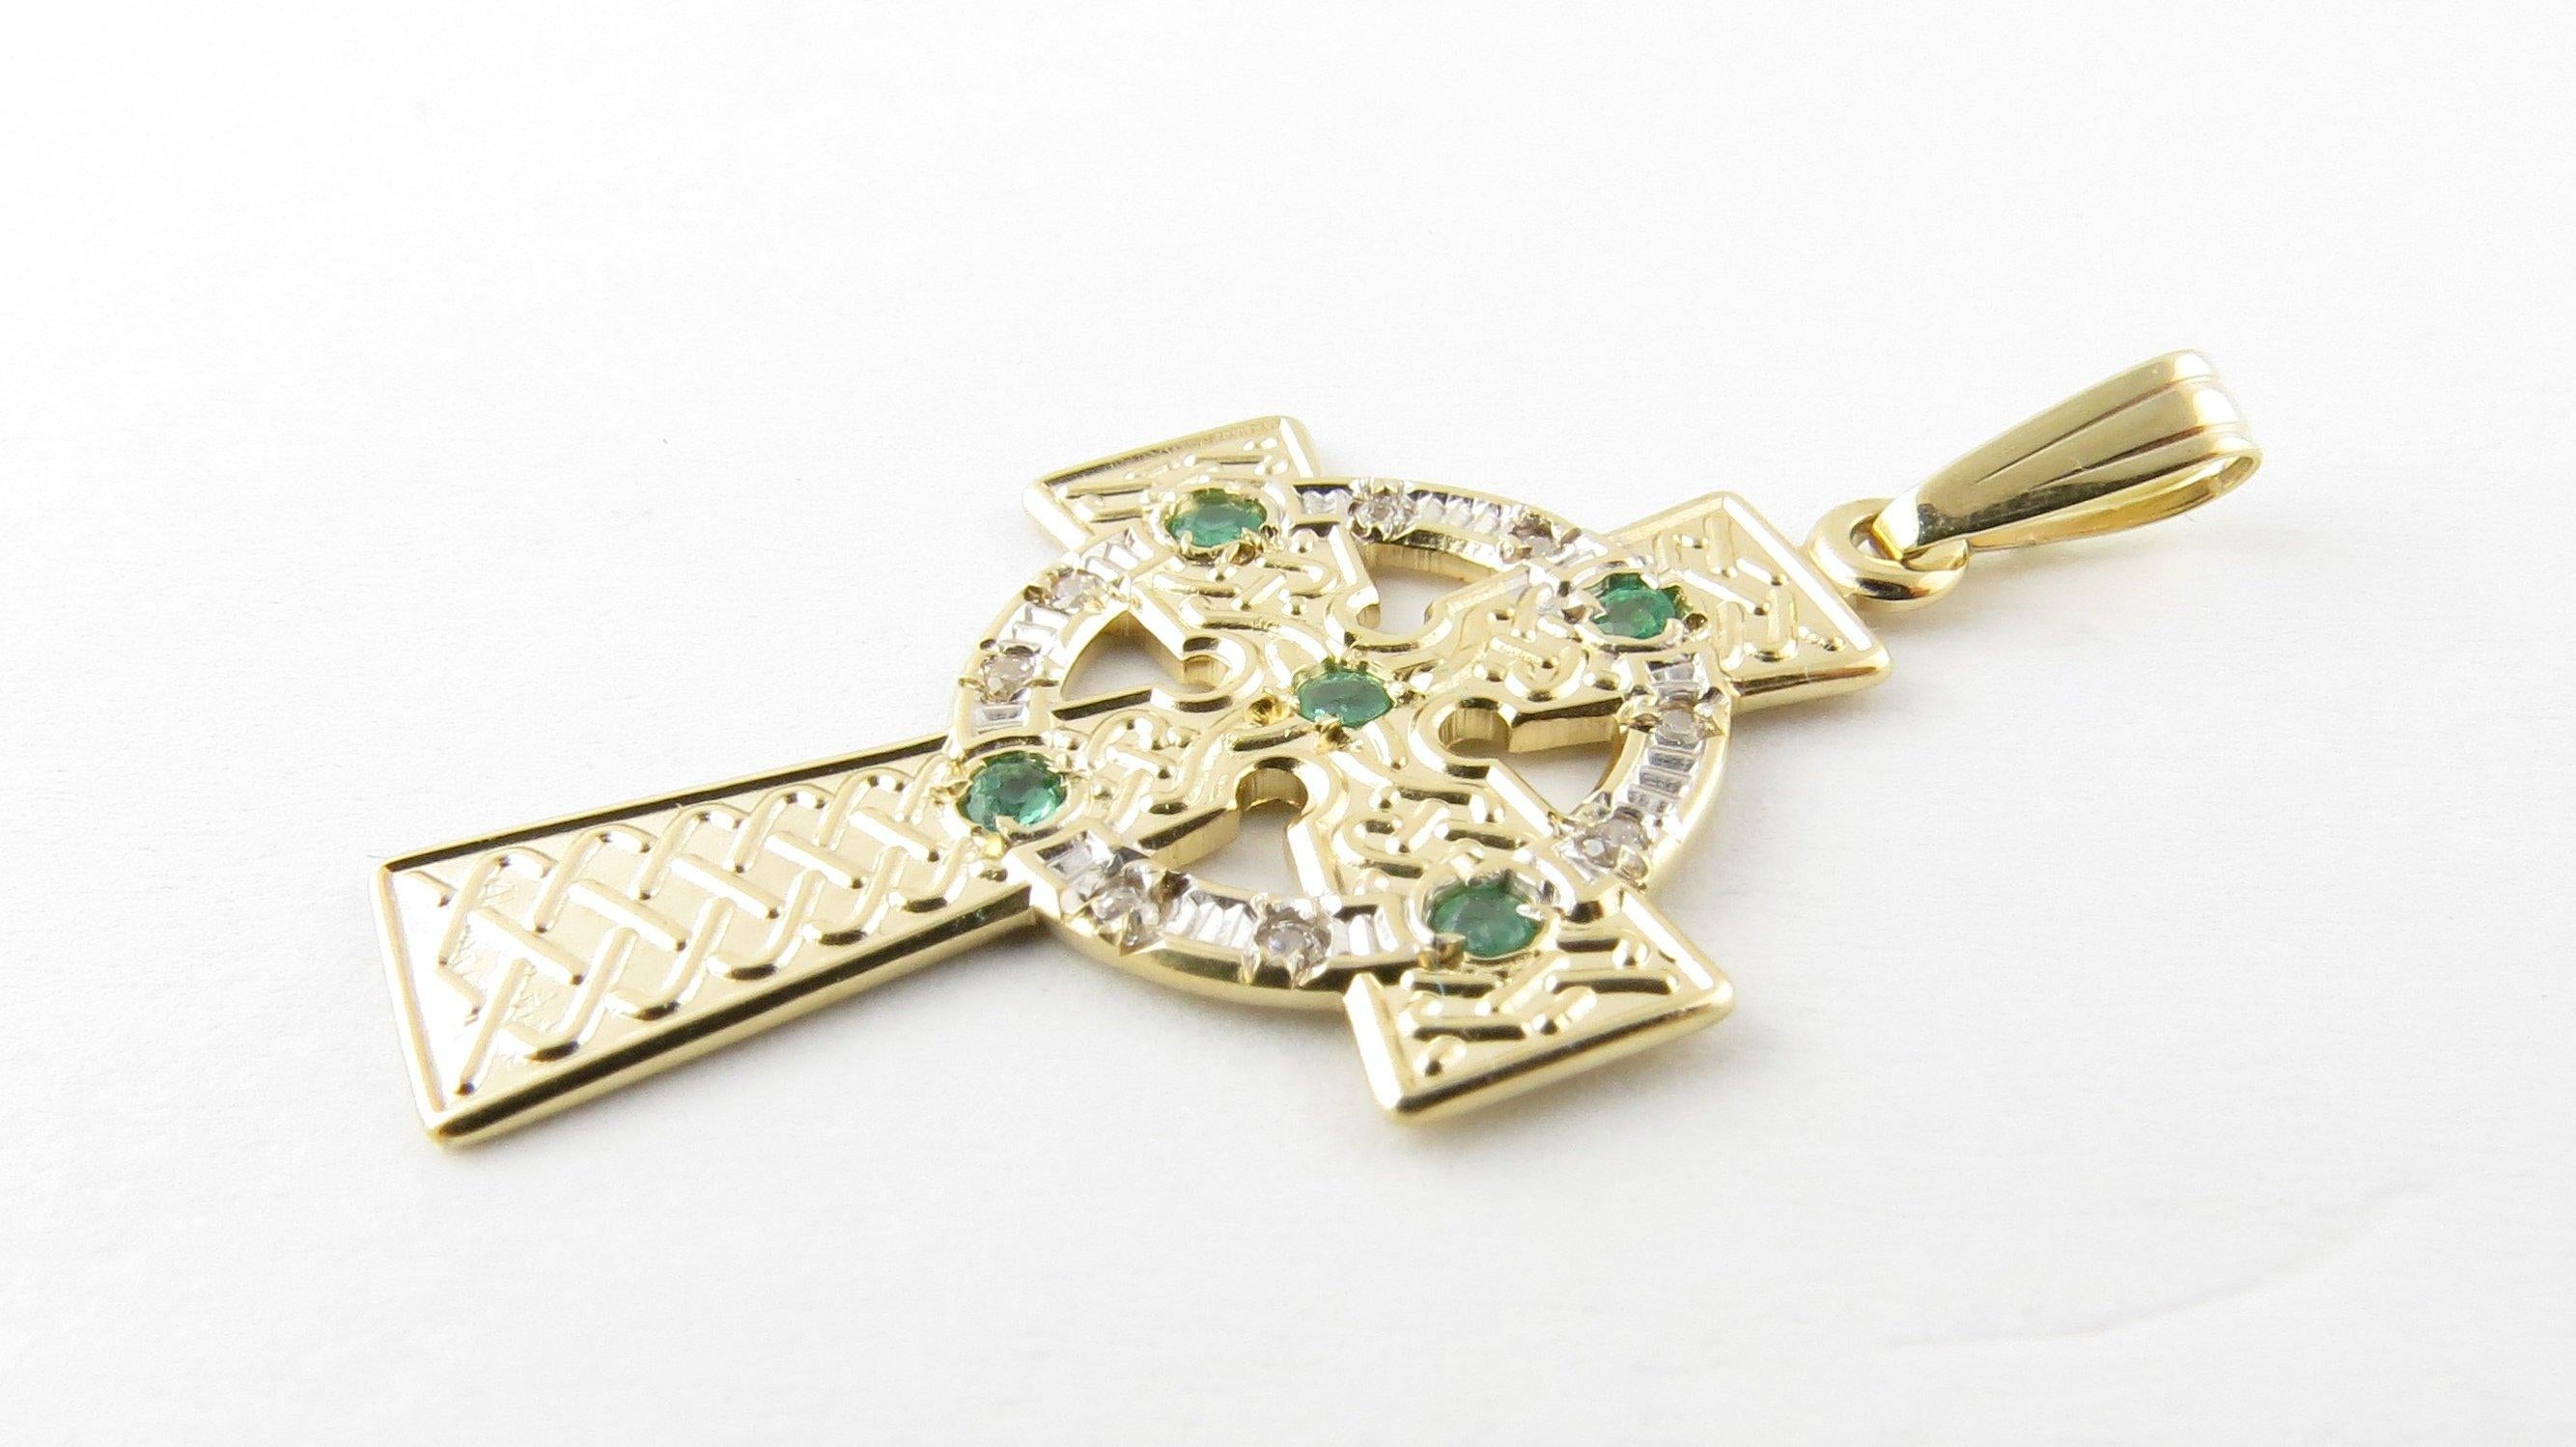 Vintage 14 Karat Yellow Gold and Emerald Celtic Cross Pendant- 
This lovely pendant features a stunning Celtic cross accented with five round genuine emeralds. 
Size: 30 mm x 19 mm (actual pendant) 
Weight: 1.4 dwt. / 2.3 gr. 
Hallmark: Made in